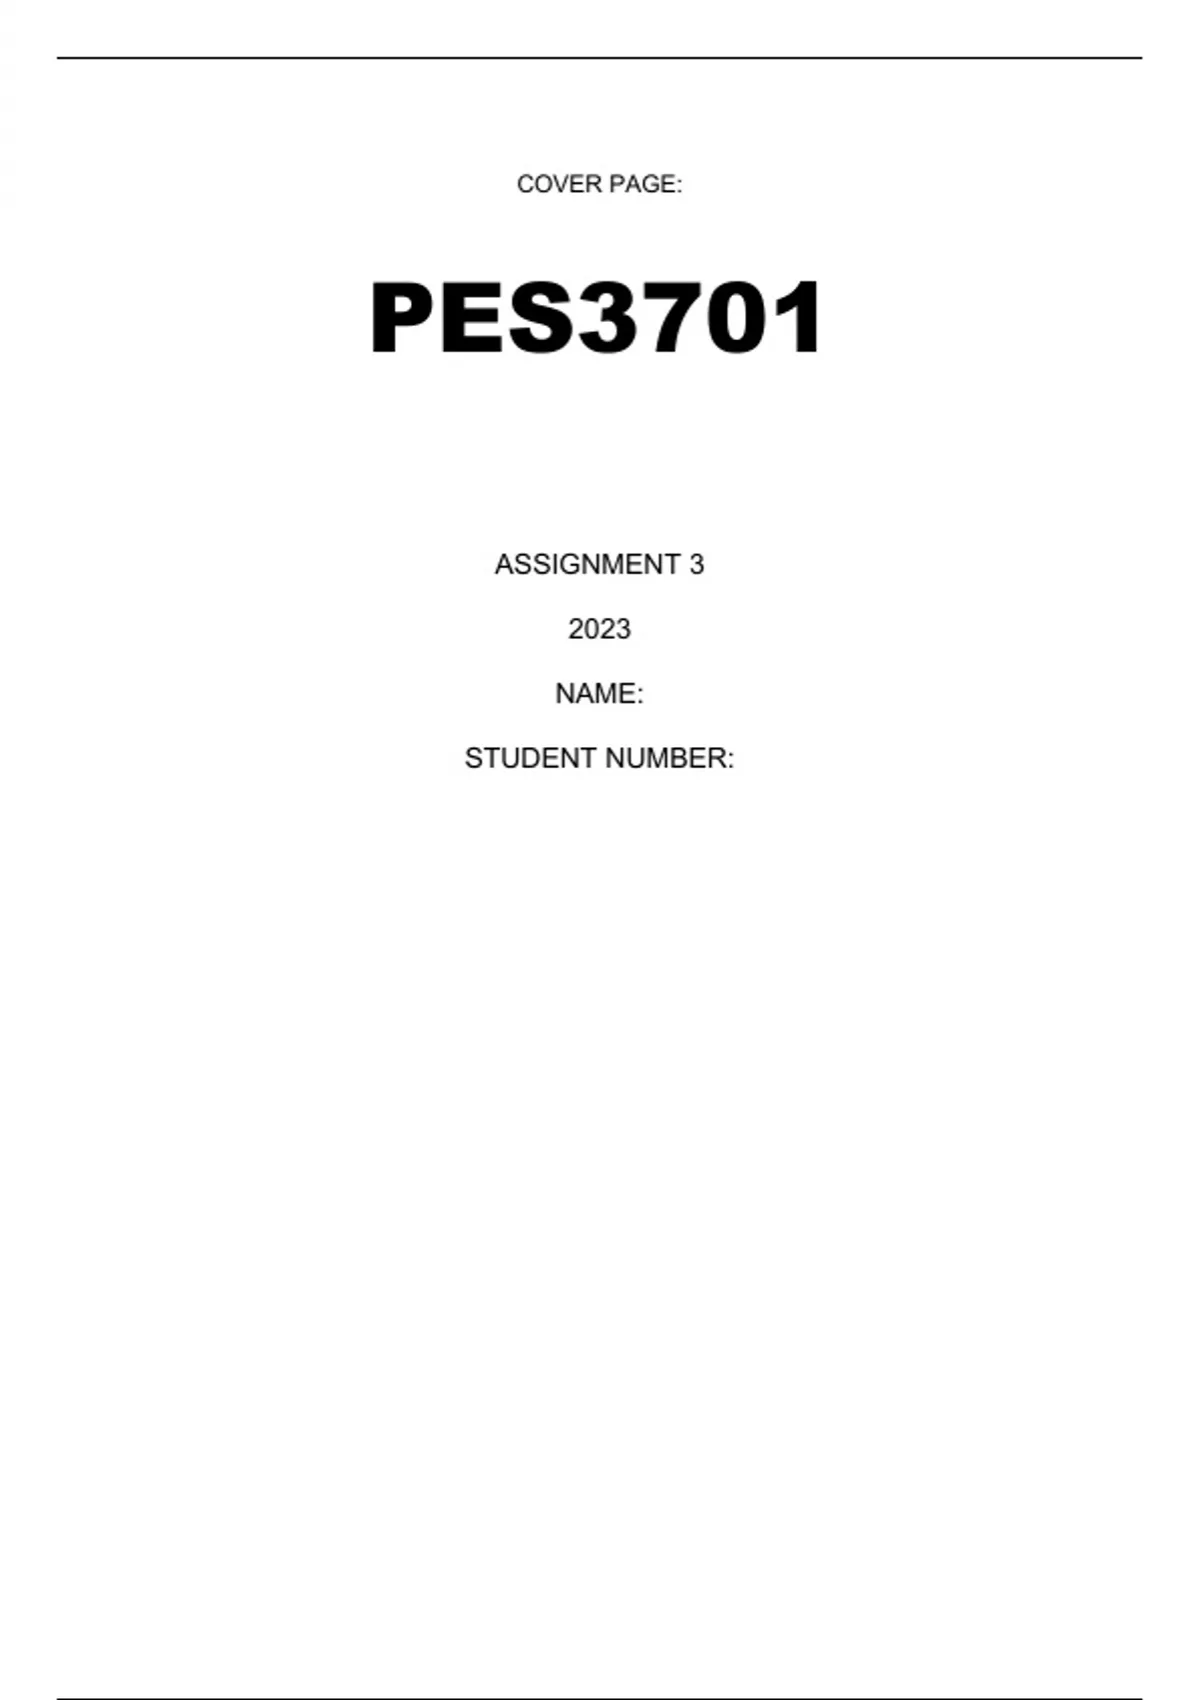 pes3701 assignment 3 answers pdf